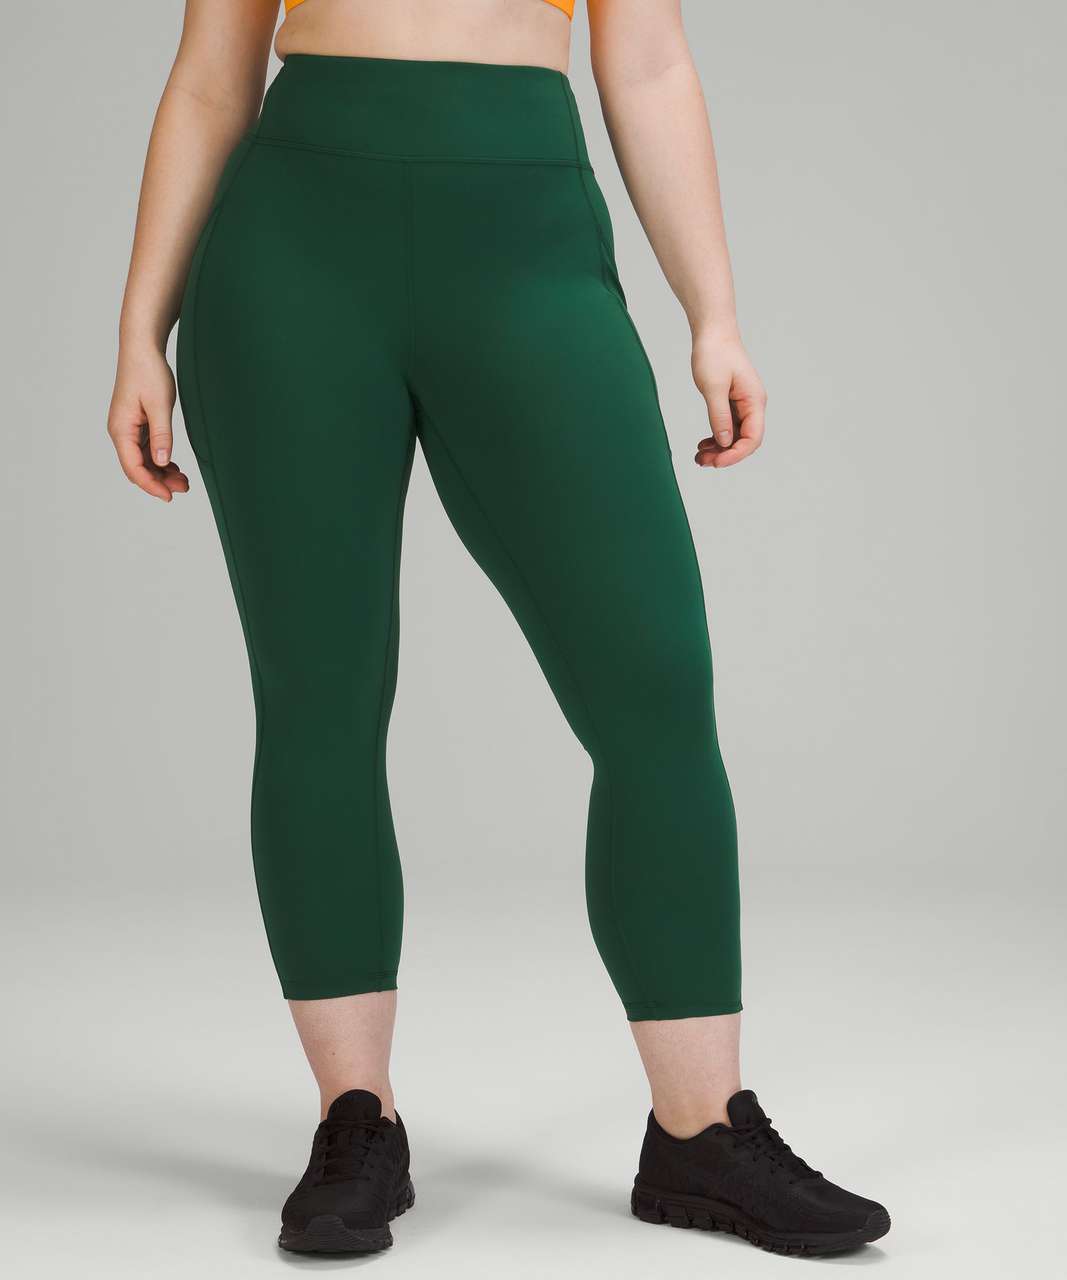 Lululemon NWT Everglade Green Leggings Size 4 - $100 New With Tags - From  Maya